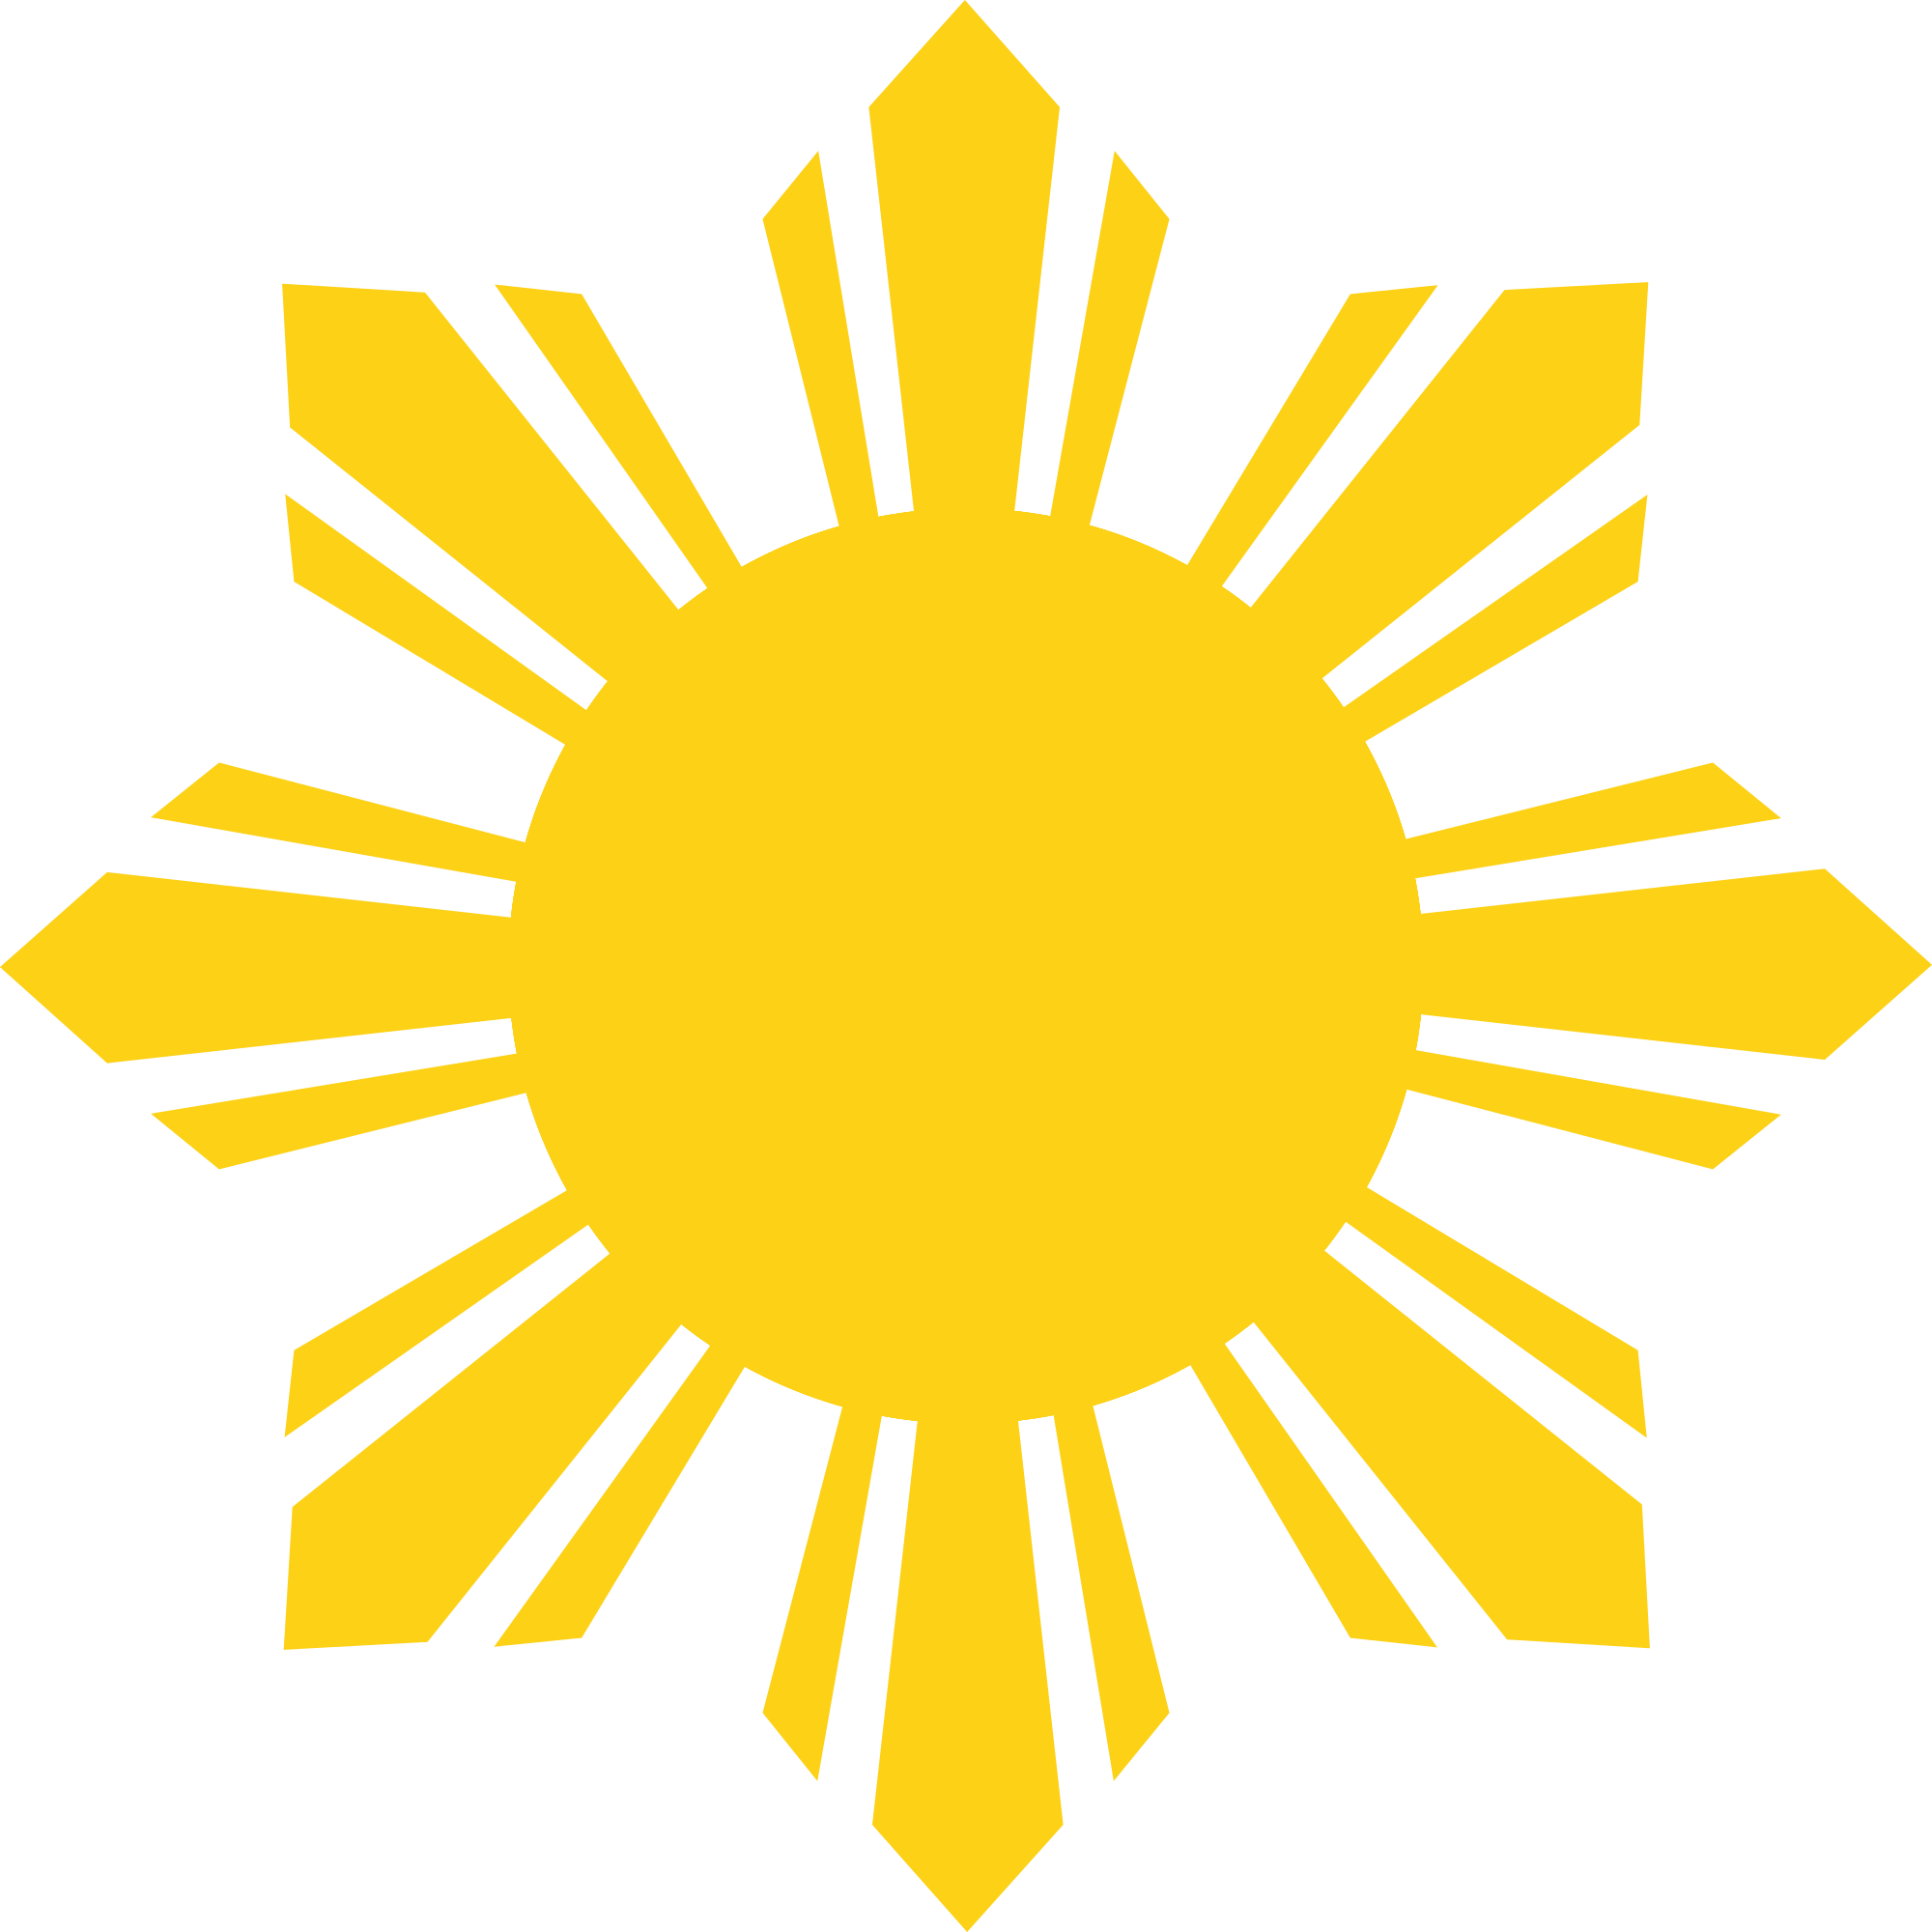 Flag Of The Philippines - 3 Stars And A Sun (2000x2000)